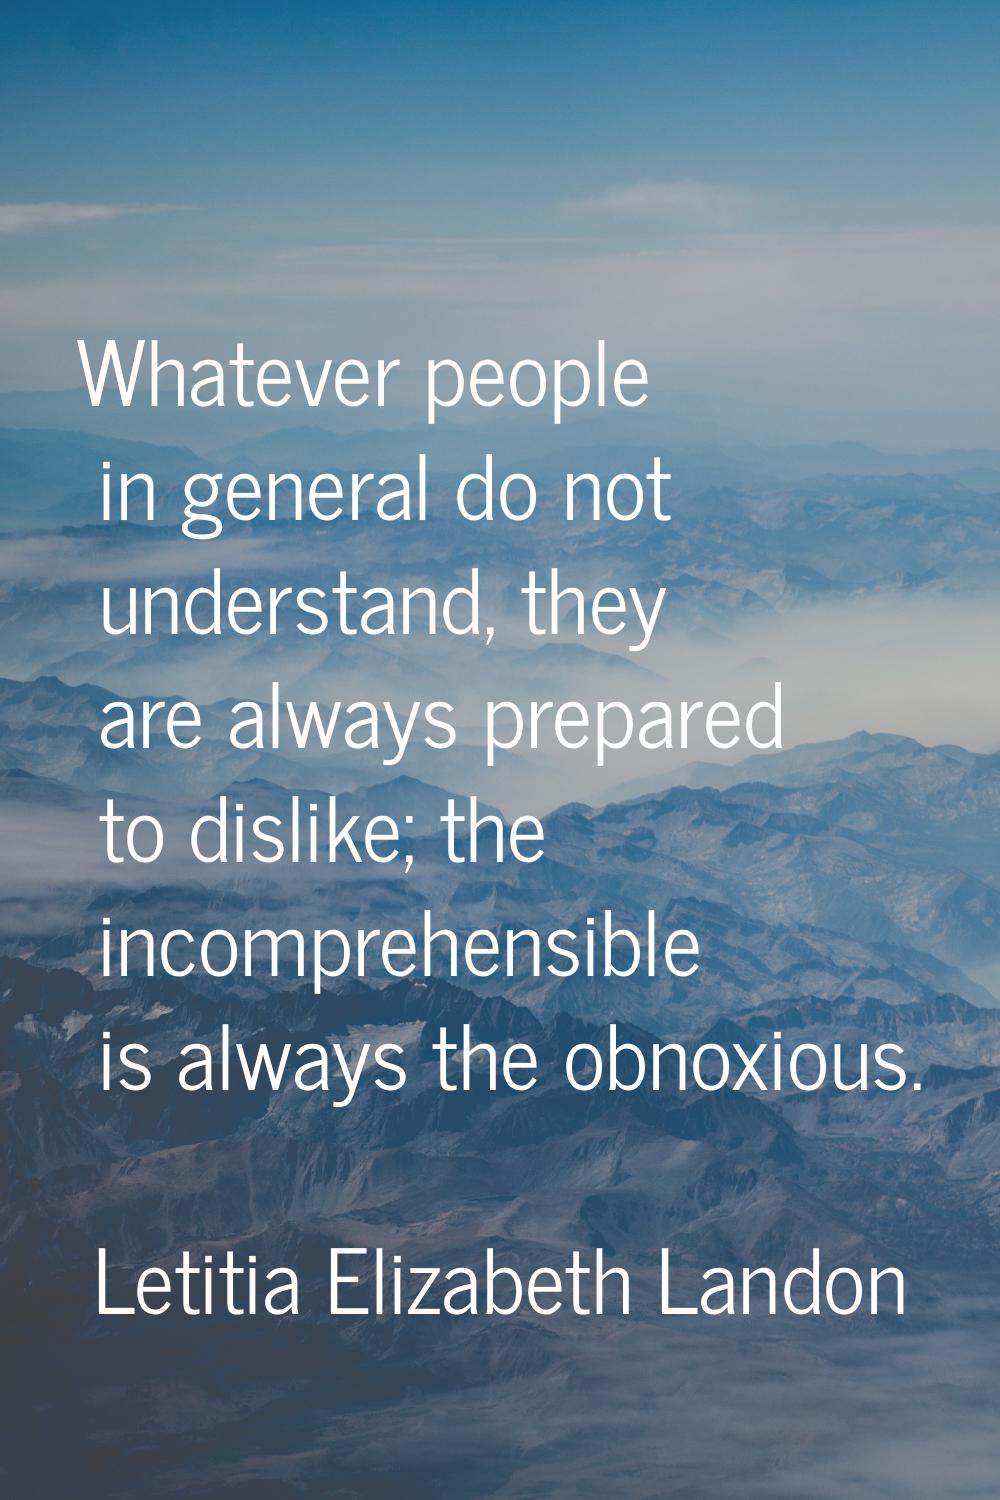 Whatever people in general do not understand, they are always prepared to dislike; the incomprehens